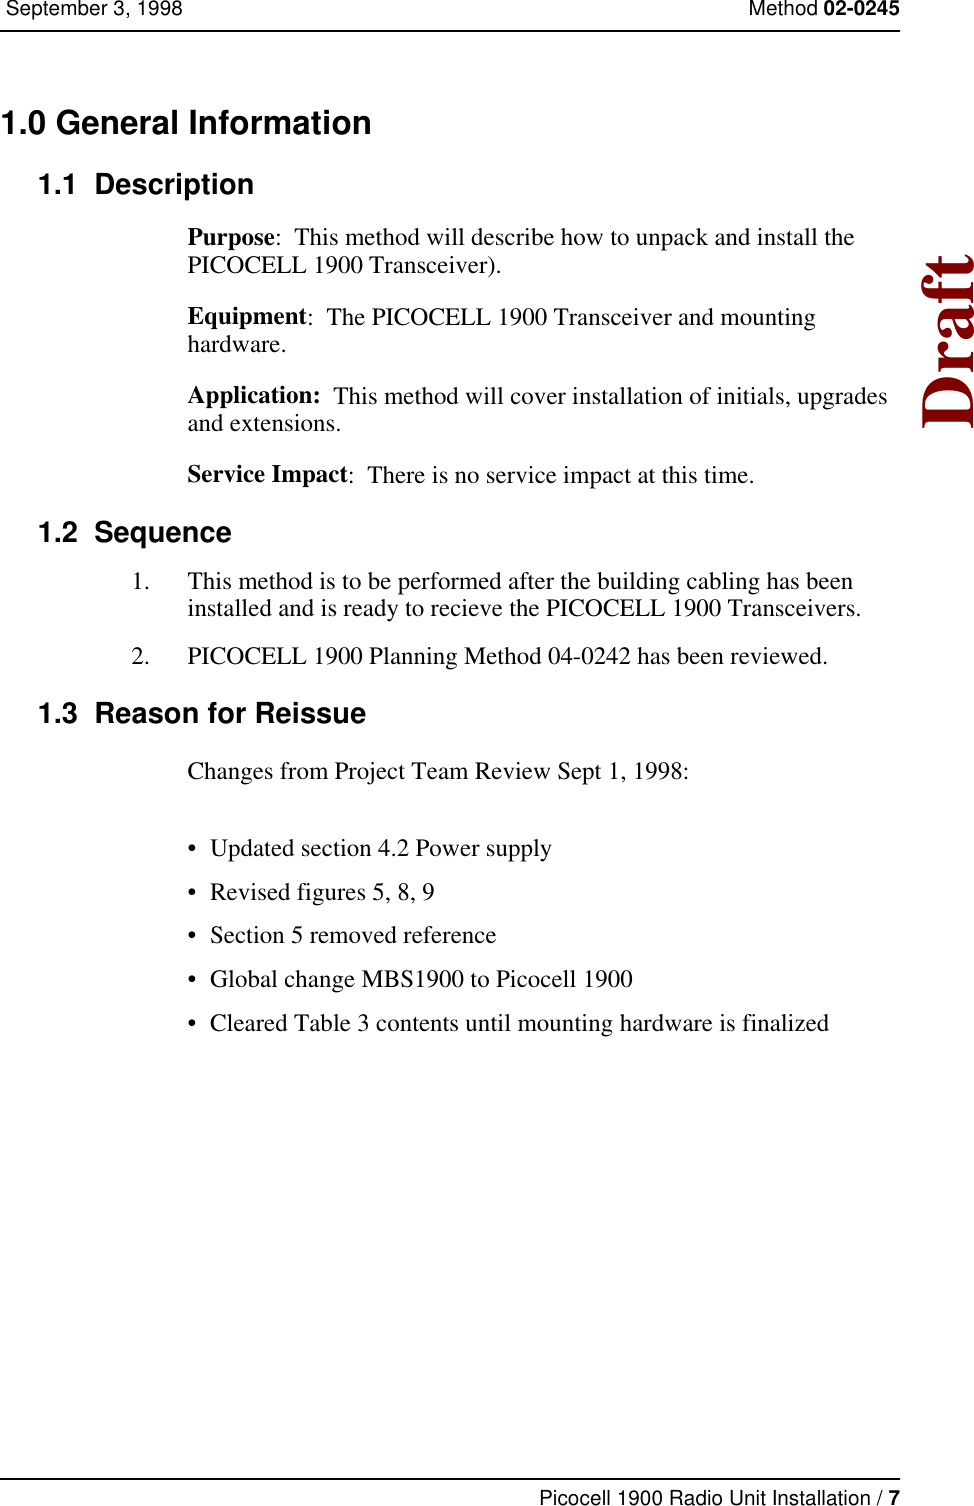 Picocell 1900 Radio Unit Installation / 7 September 3, 1998 Method 02-0245Draft1.0 General Information  1.1  DescriptionPurpose:  This method will describe how to unpack and install the PICOCELL 1900 Transceiver).Equipment:  The PICOCELL 1900 Transceiver and mounting hardware.Application:  This method will cover installation of initials, upgrades and extensions.Service Impact:  There is no service impact at this time.1.2  Sequence1. This method is to be performed after the building cabling has been installed and is ready to recieve the PICOCELL 1900 Transceivers. 2. PICOCELL 1900 Planning Method 04-0242 has been reviewed.   1.3  Reason for ReissueChanges from Project Team Review Sept 1, 1998:• Updated section 4.2 Power supply • Revised figures 5, 8, 9• Section 5 removed reference• Global change MBS1900 to Picocell 1900• Cleared Table 3 contents until mounting hardware is finalized